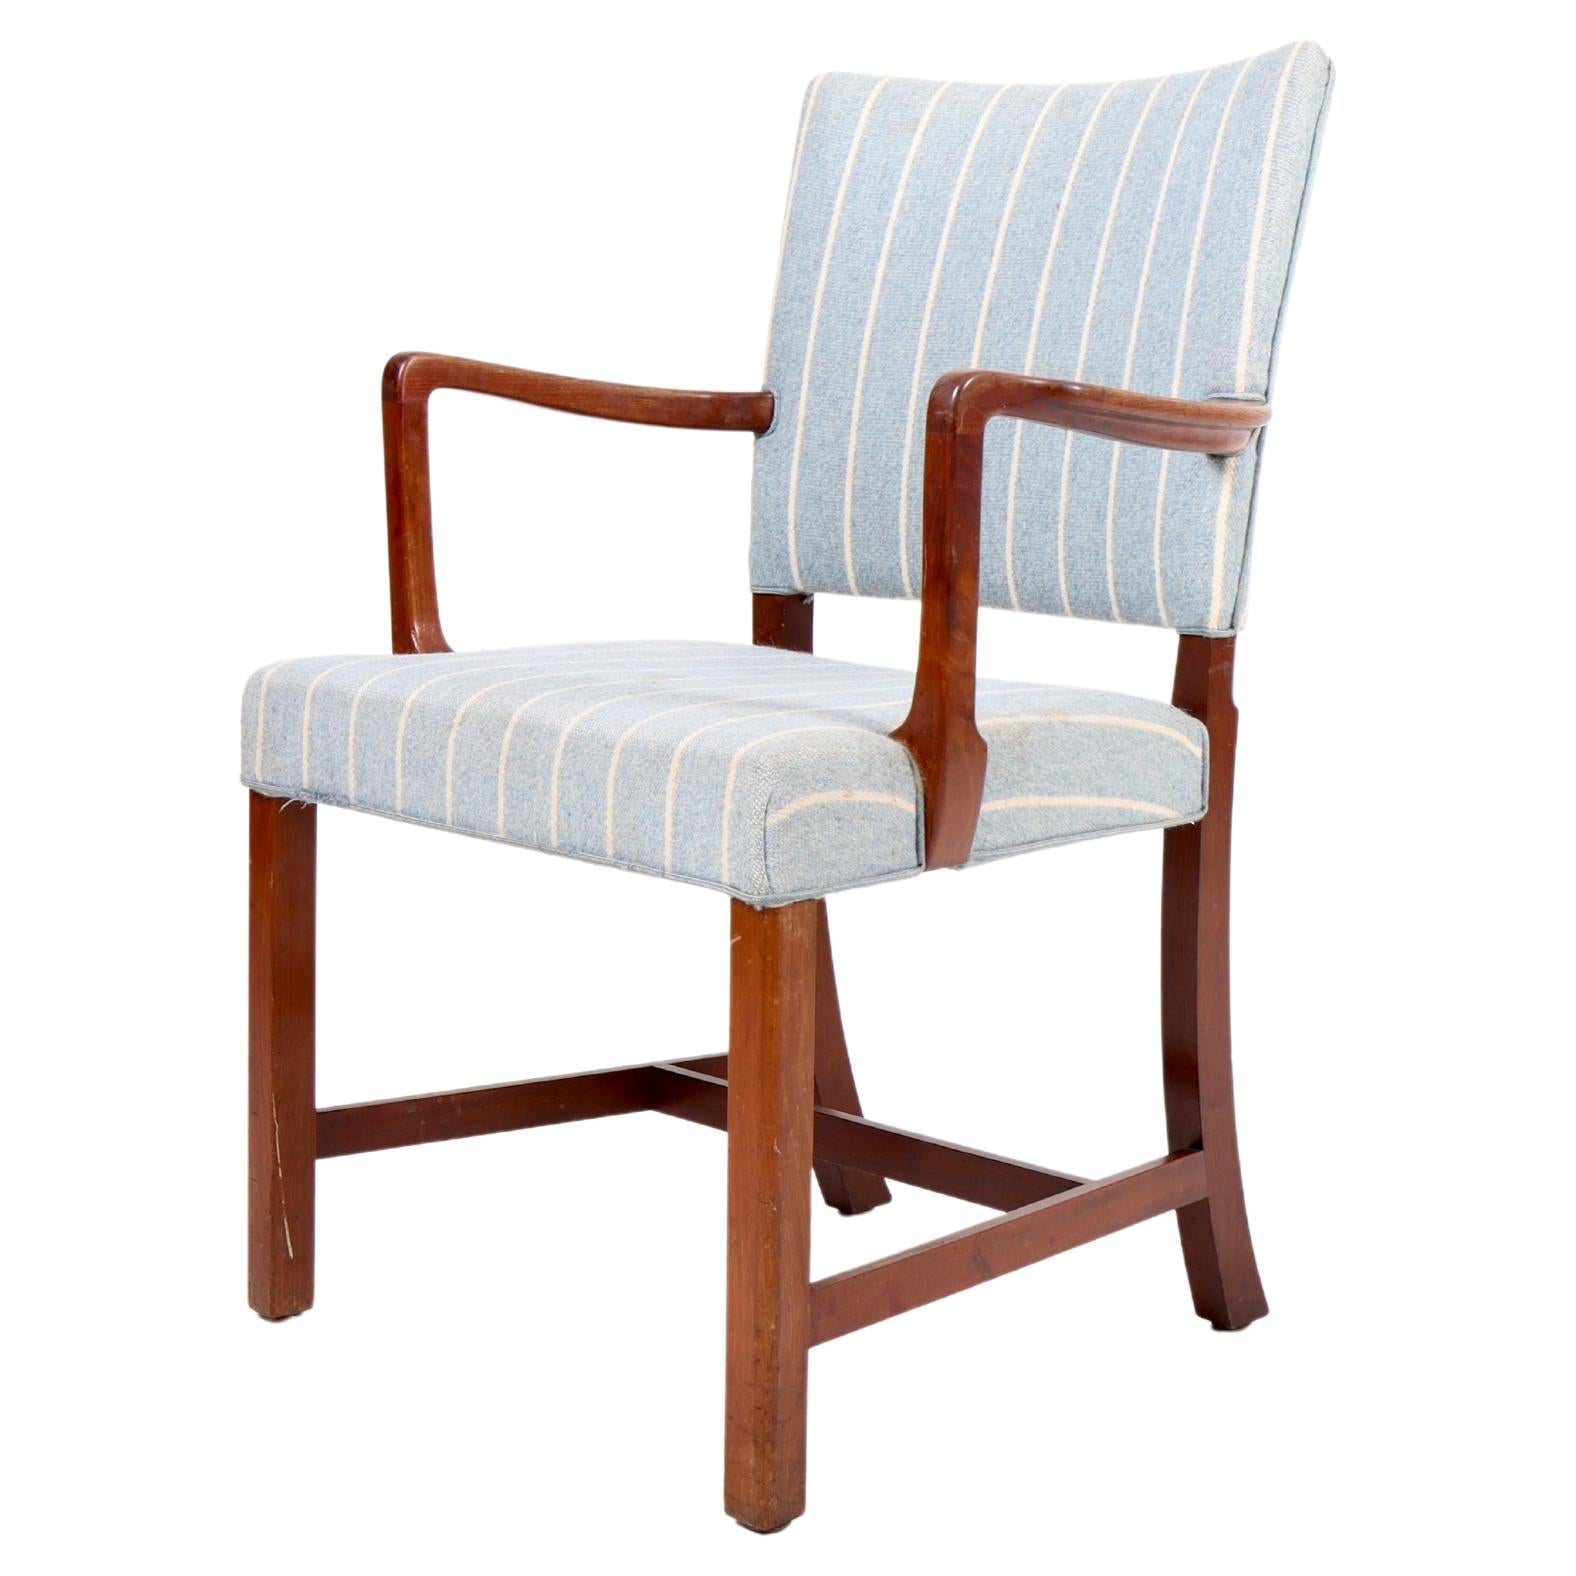 Arm chair in solid teak and fabric designed by Maa. Ole Wanscher and made by AJ Iversen cabinet makers Copenhagen.